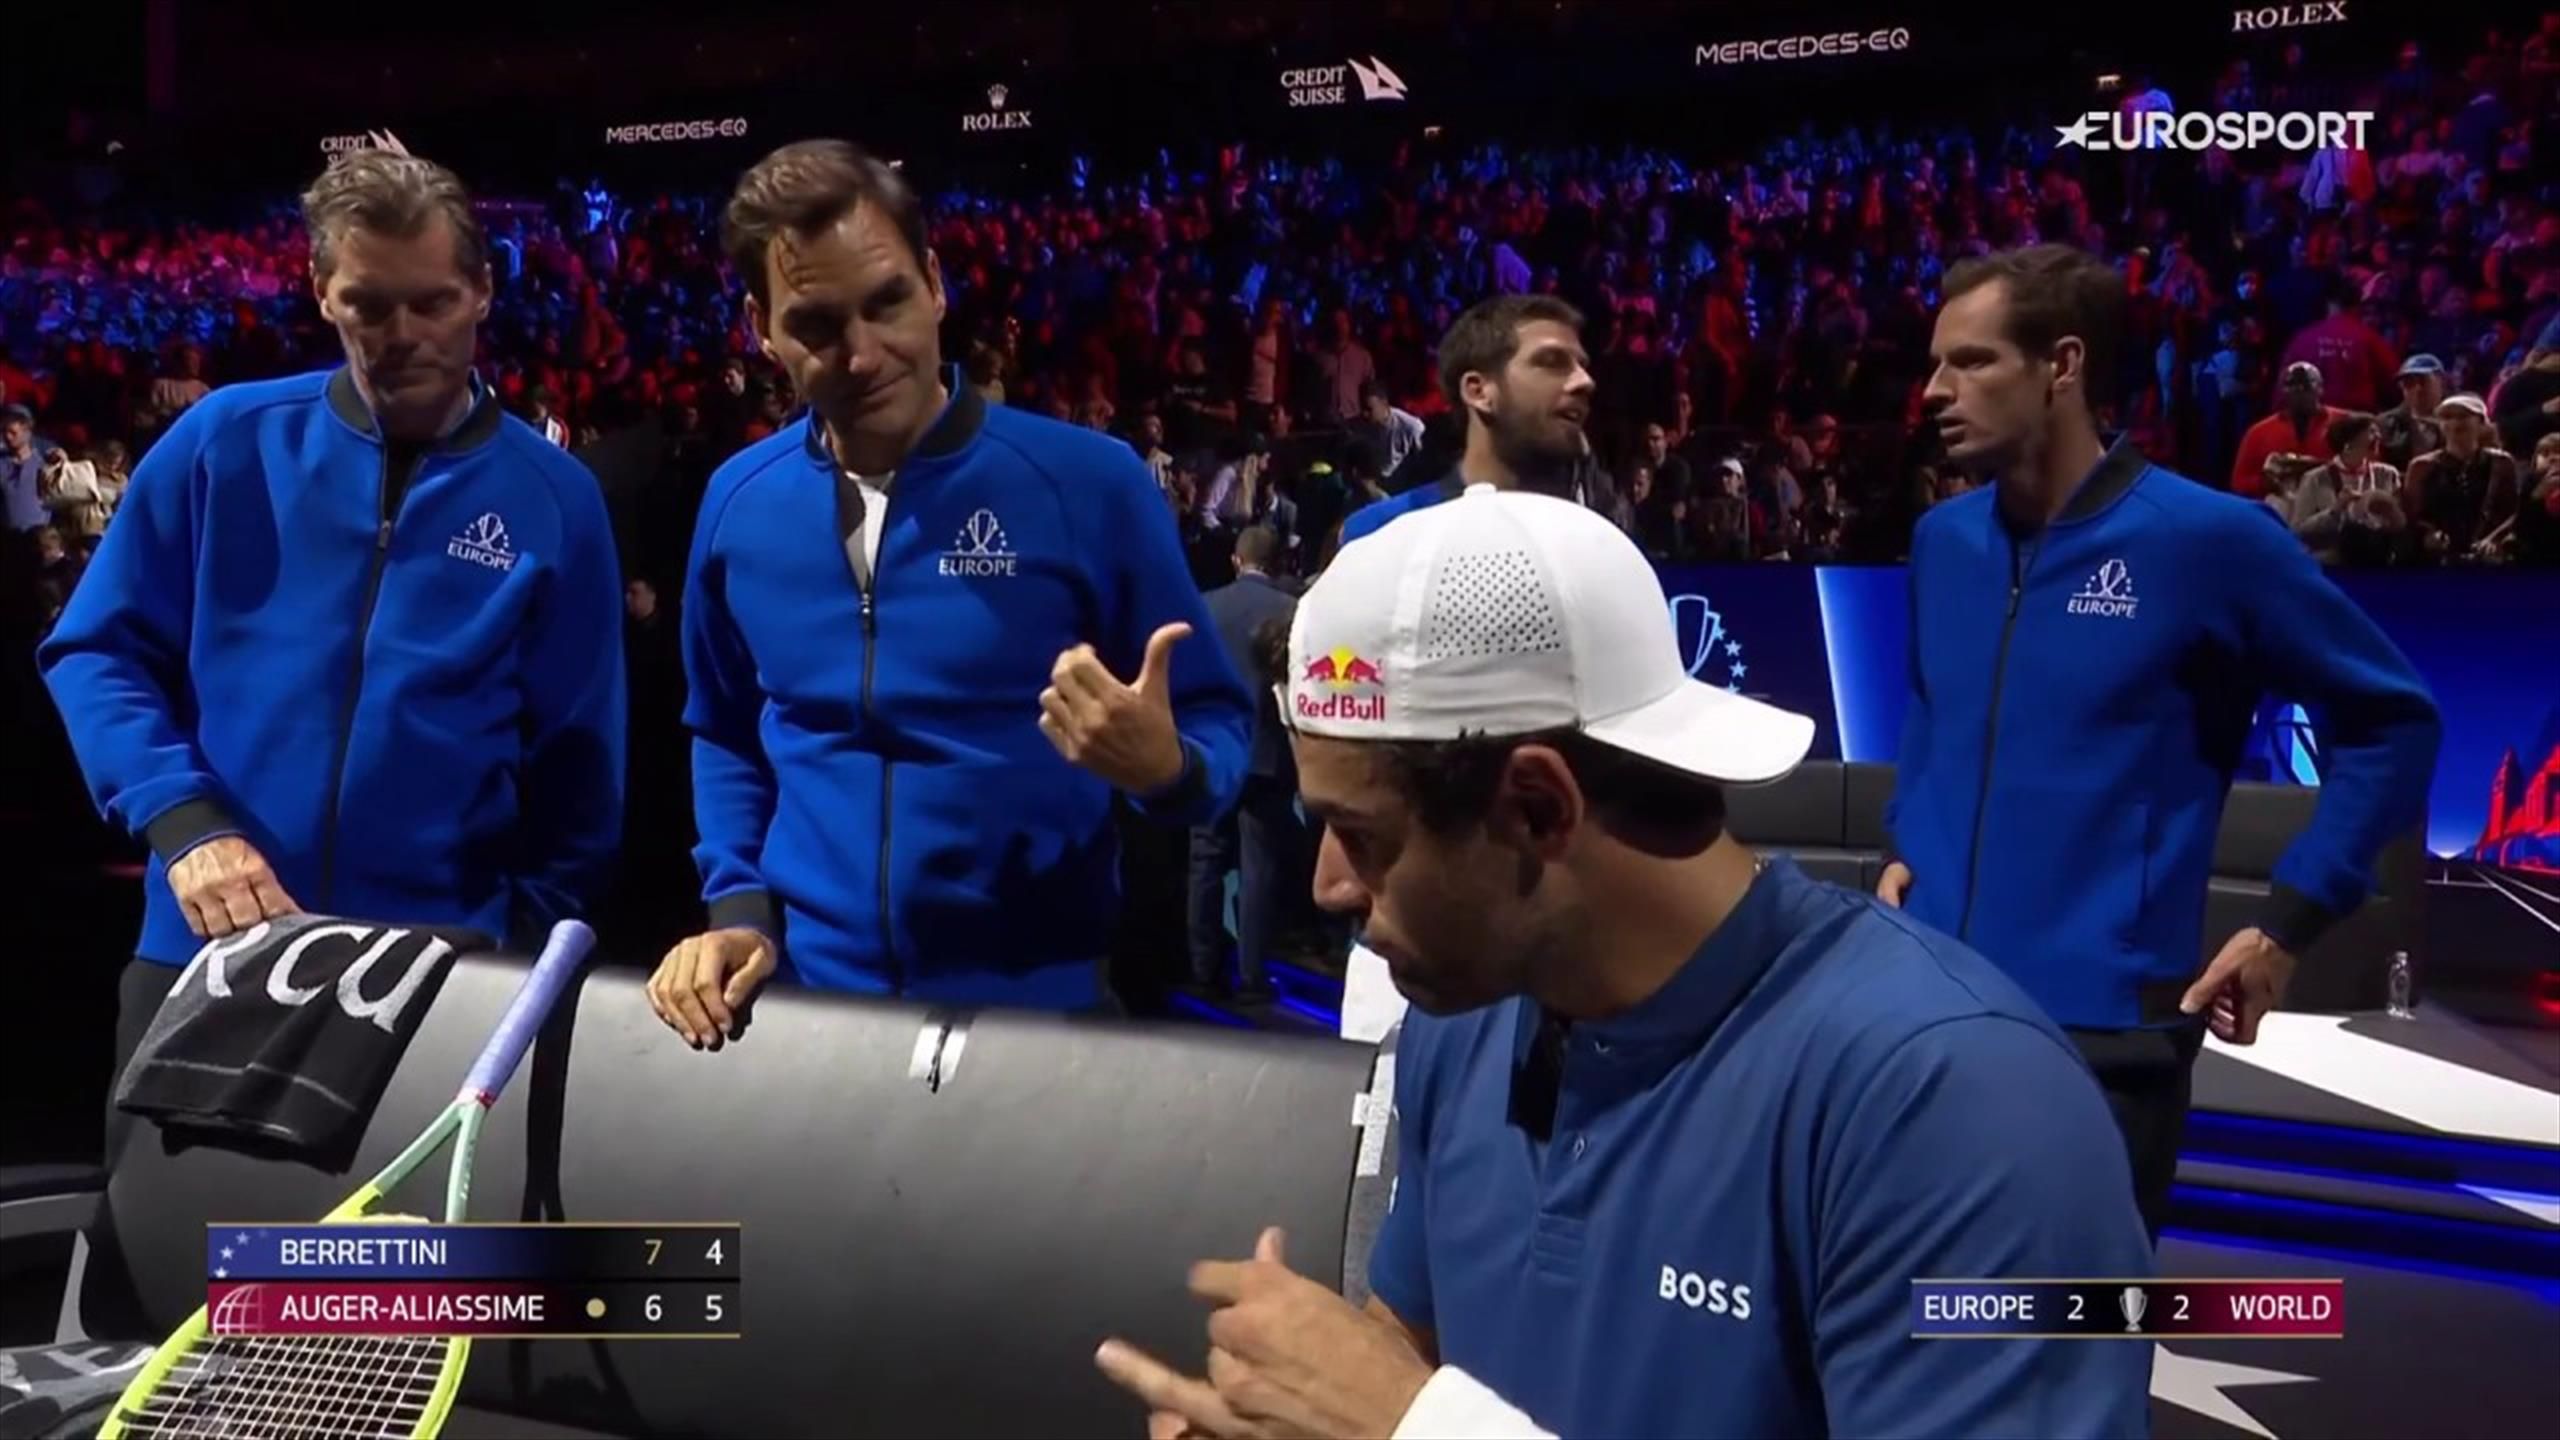 What, for the salad?! - Roger Federer teases Matteo Berrettini and coaches Italian at Laver Cup changeover - Tennis video